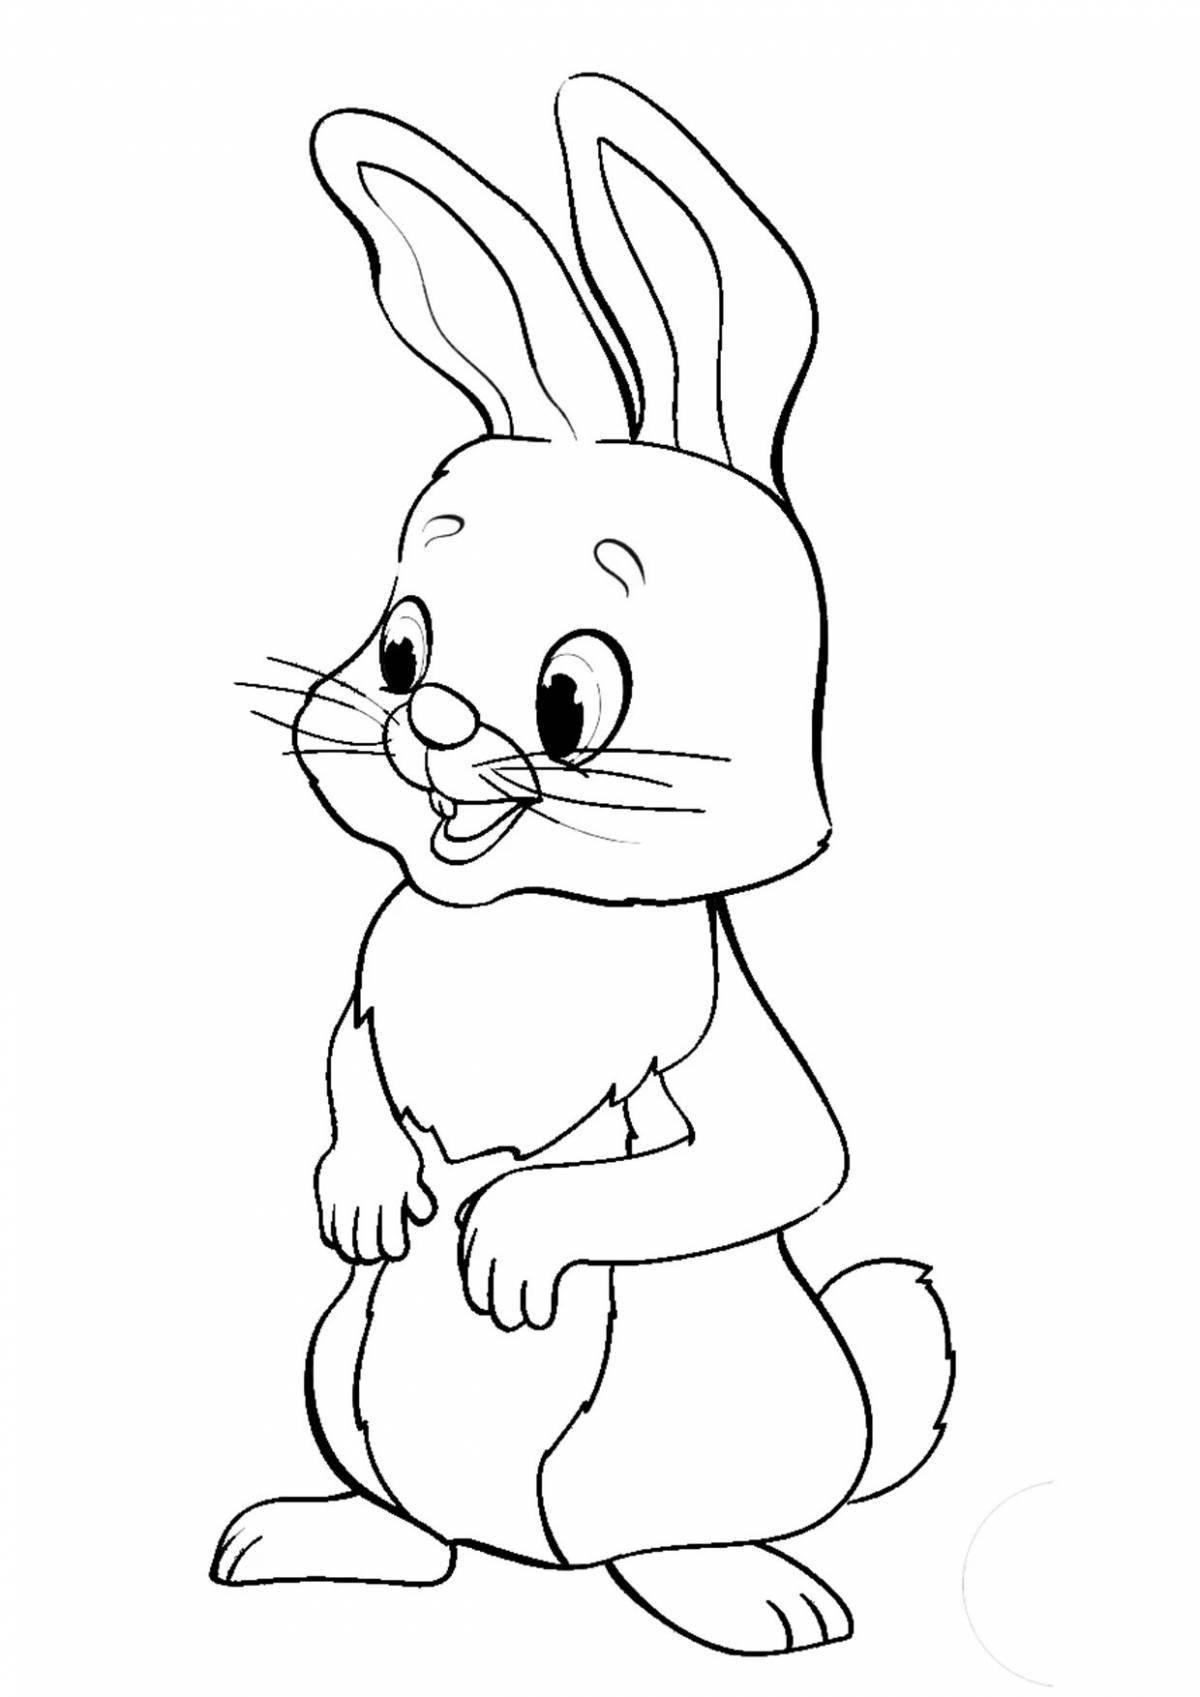 Delightful rabbit coloring book for children 2 years old